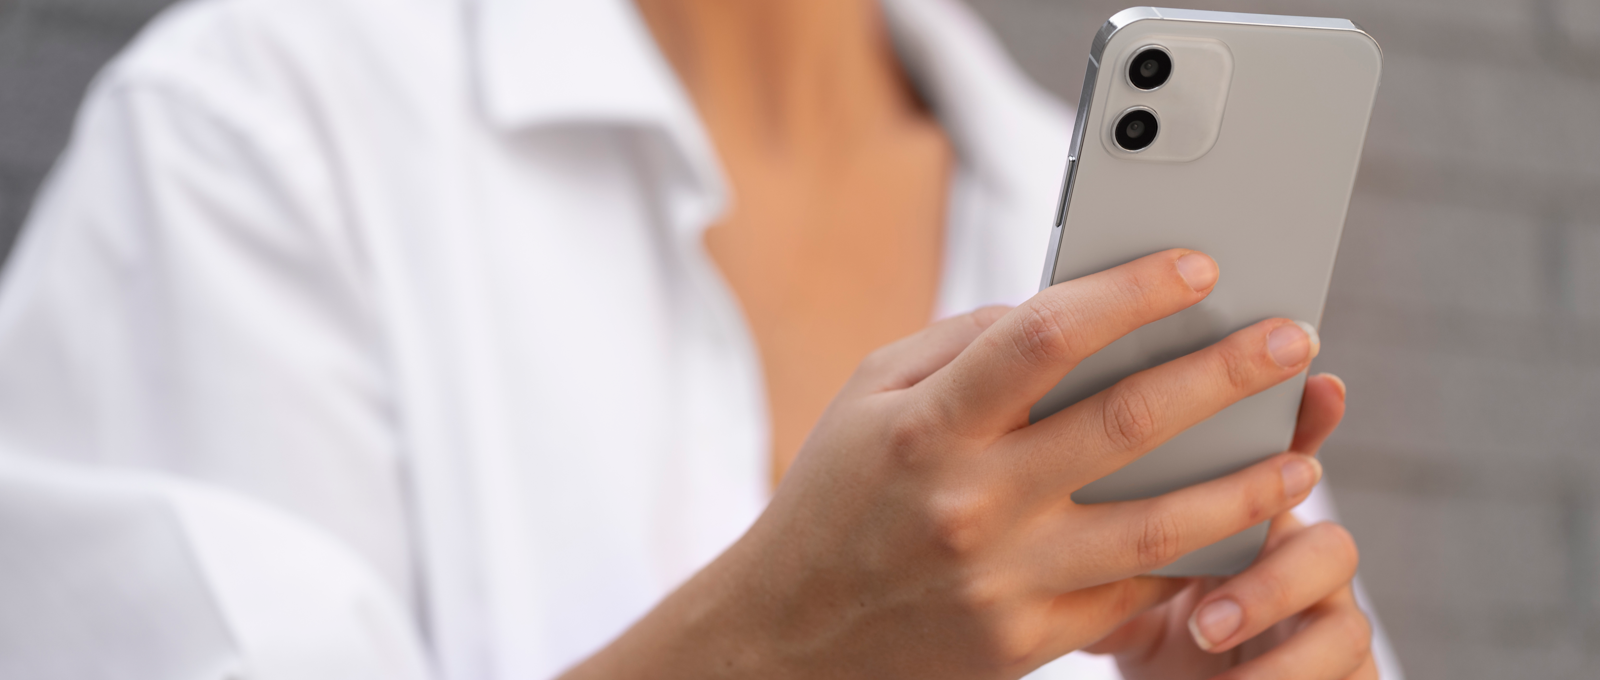 Close up photo of a woman wearing a white blouse holding a smartphone.